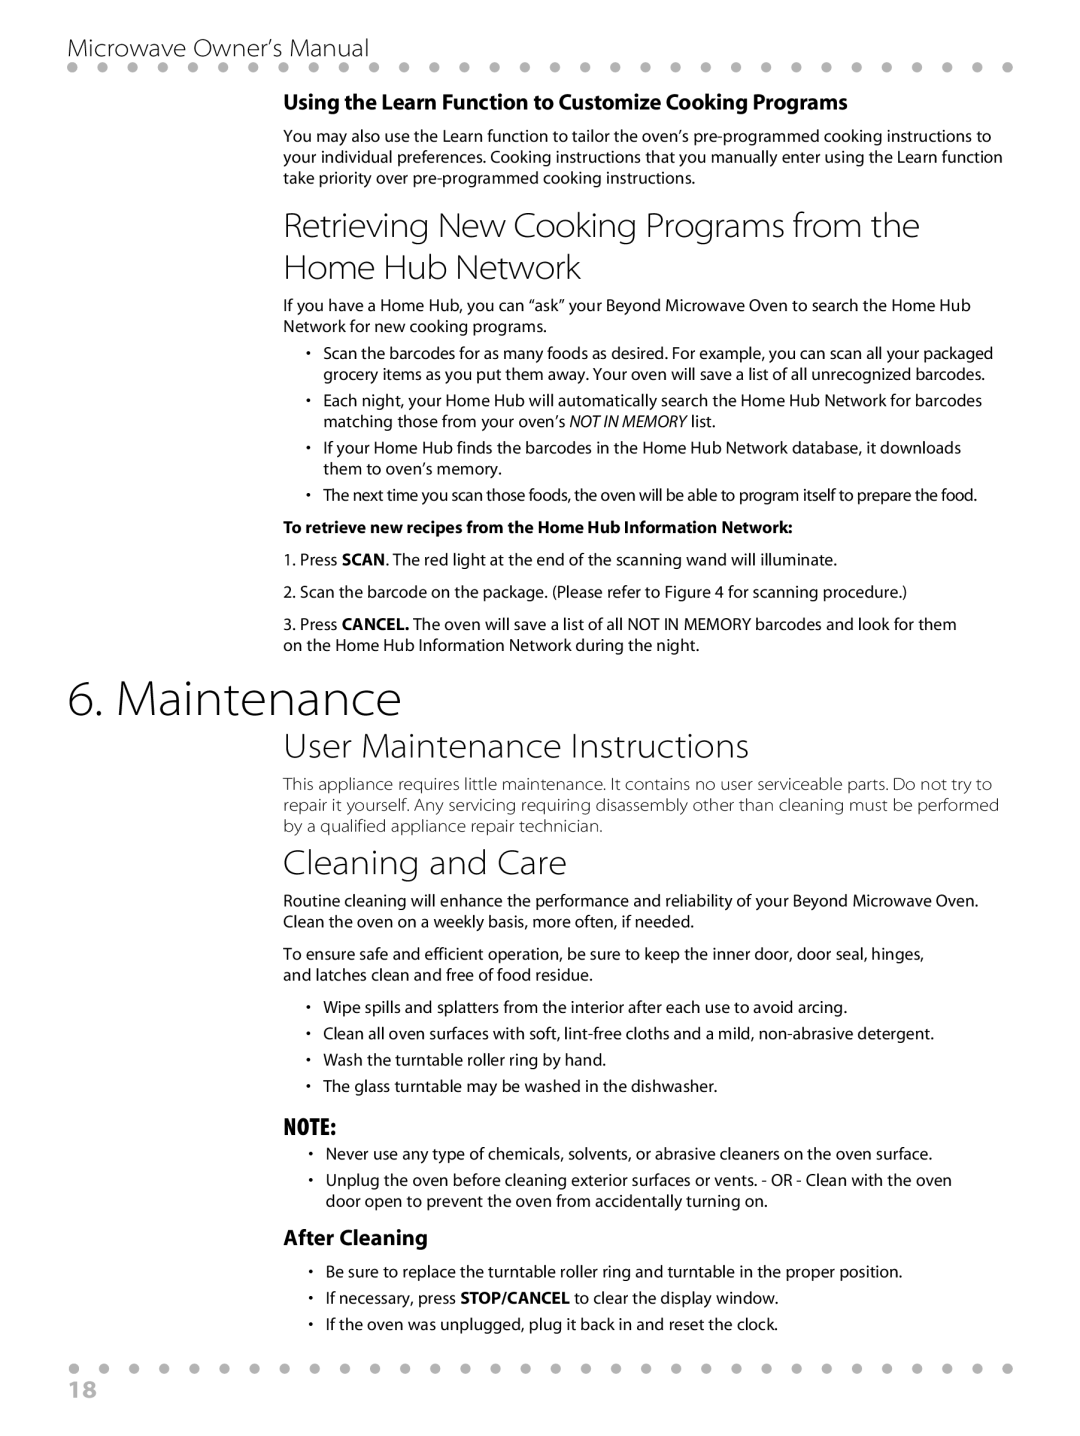 Toastmaster WBYMW1 manual Retrieving New Cooking Programs from the, Home Hub Network, User Maintenance Instructions 